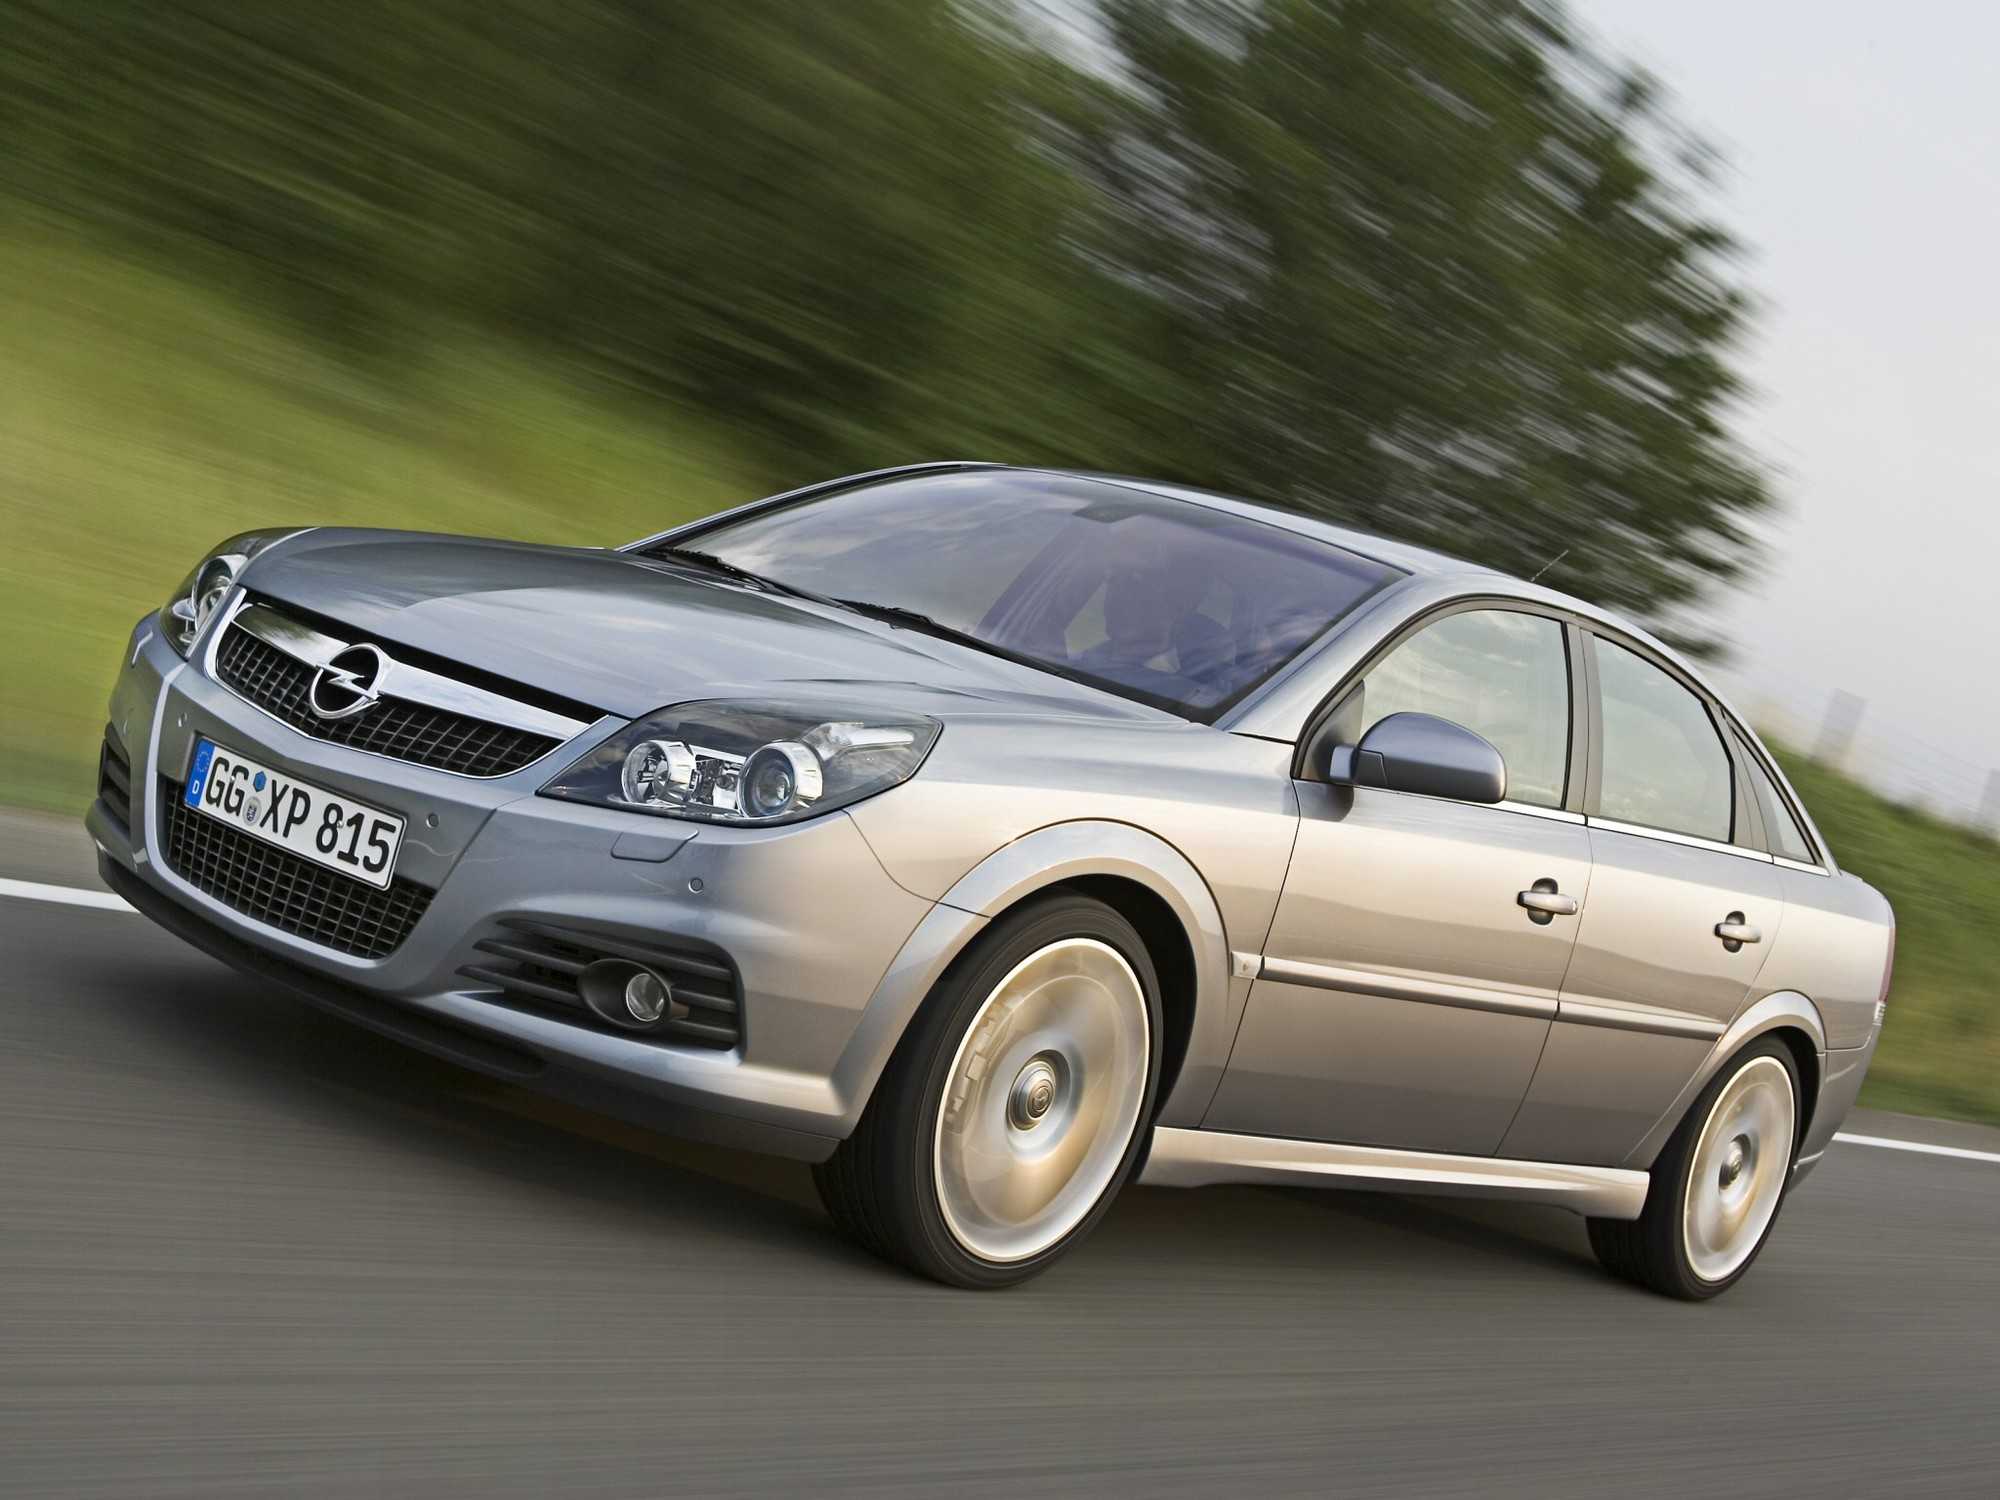 Vauxhall vectra mk 2 review (2002-2010)